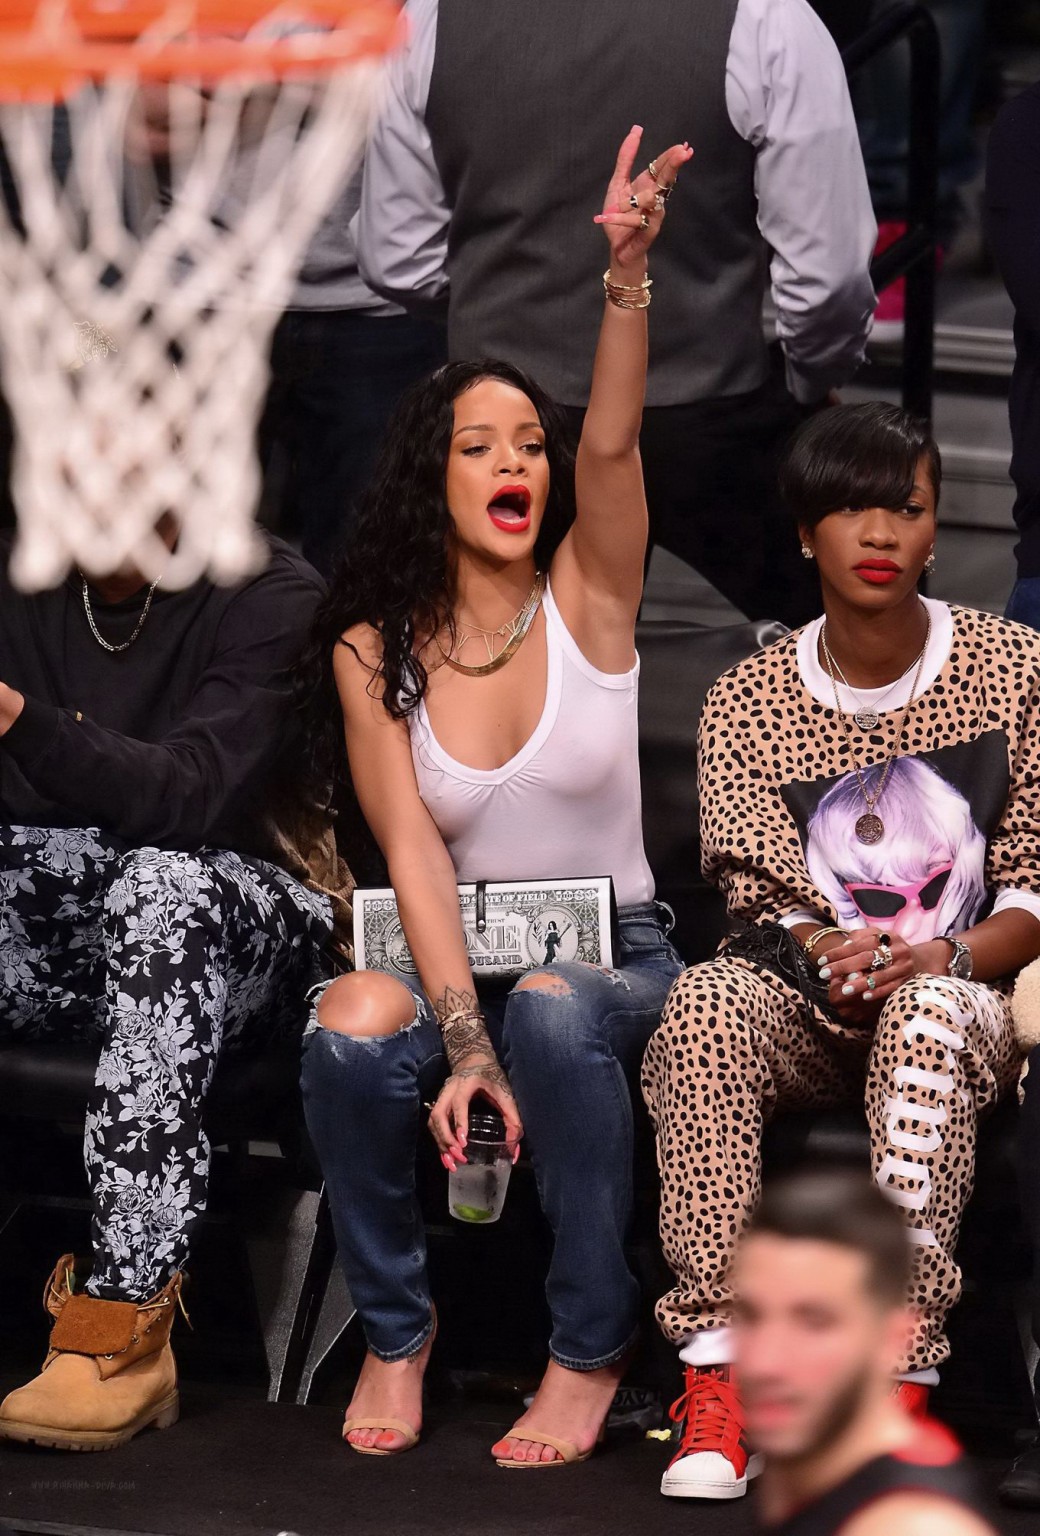 Rihanna shows off her boobs in seethru top at a basketball game in NYC #75198044